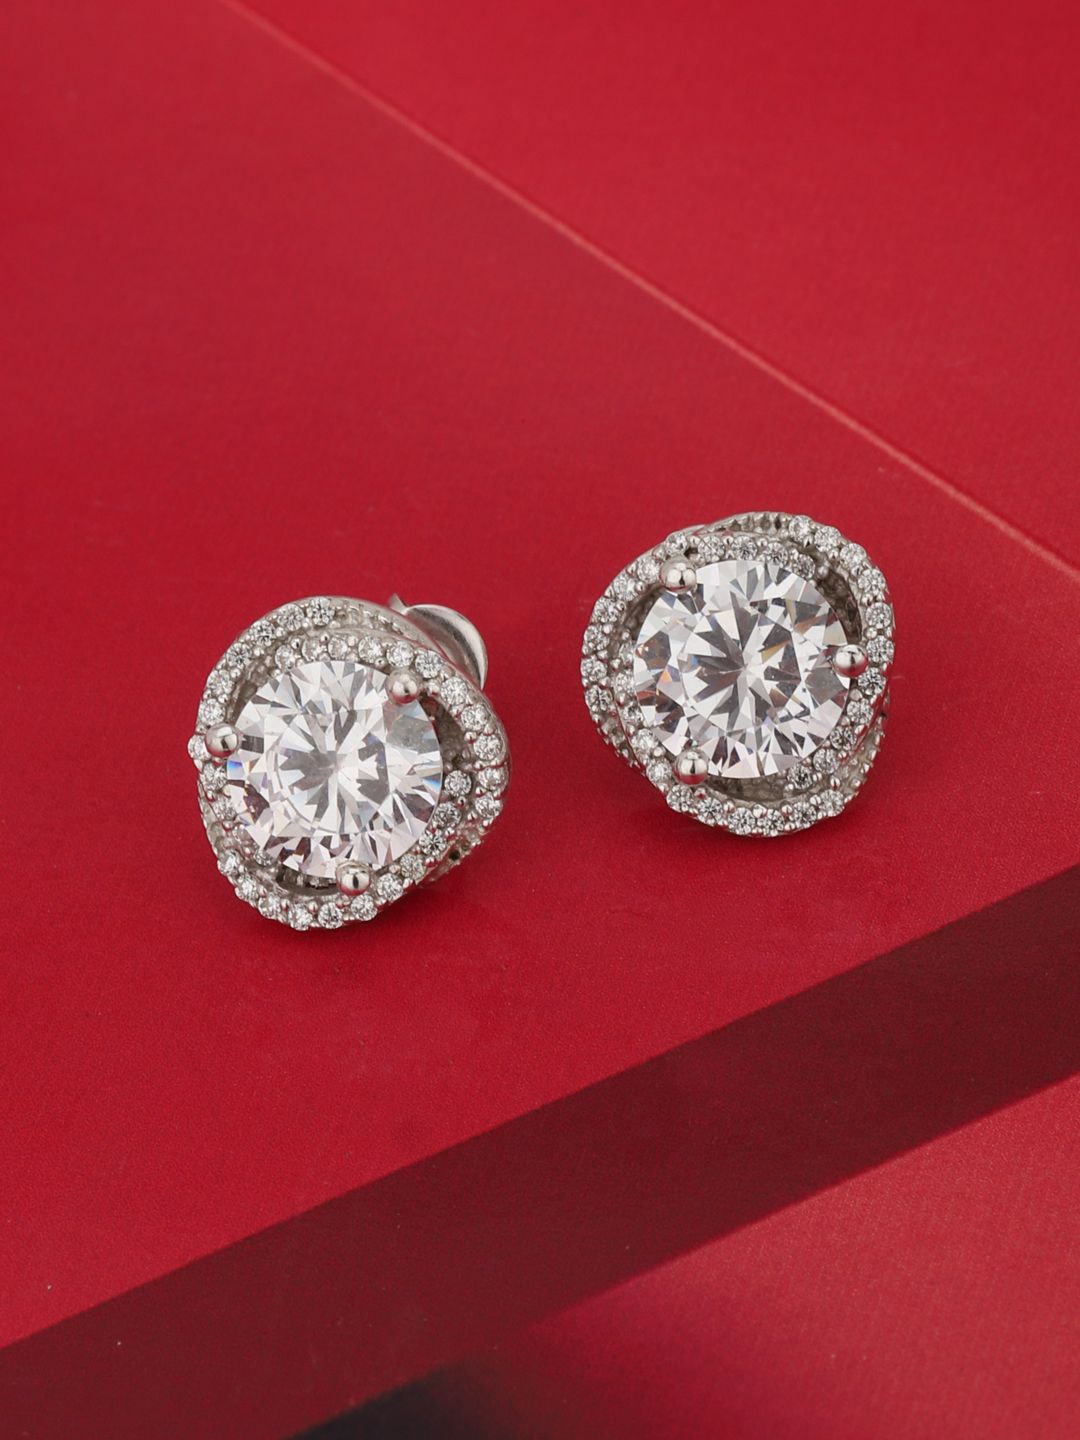 Carlton London Silver-Toned Rhodium-Plated CZ Studs Price in India